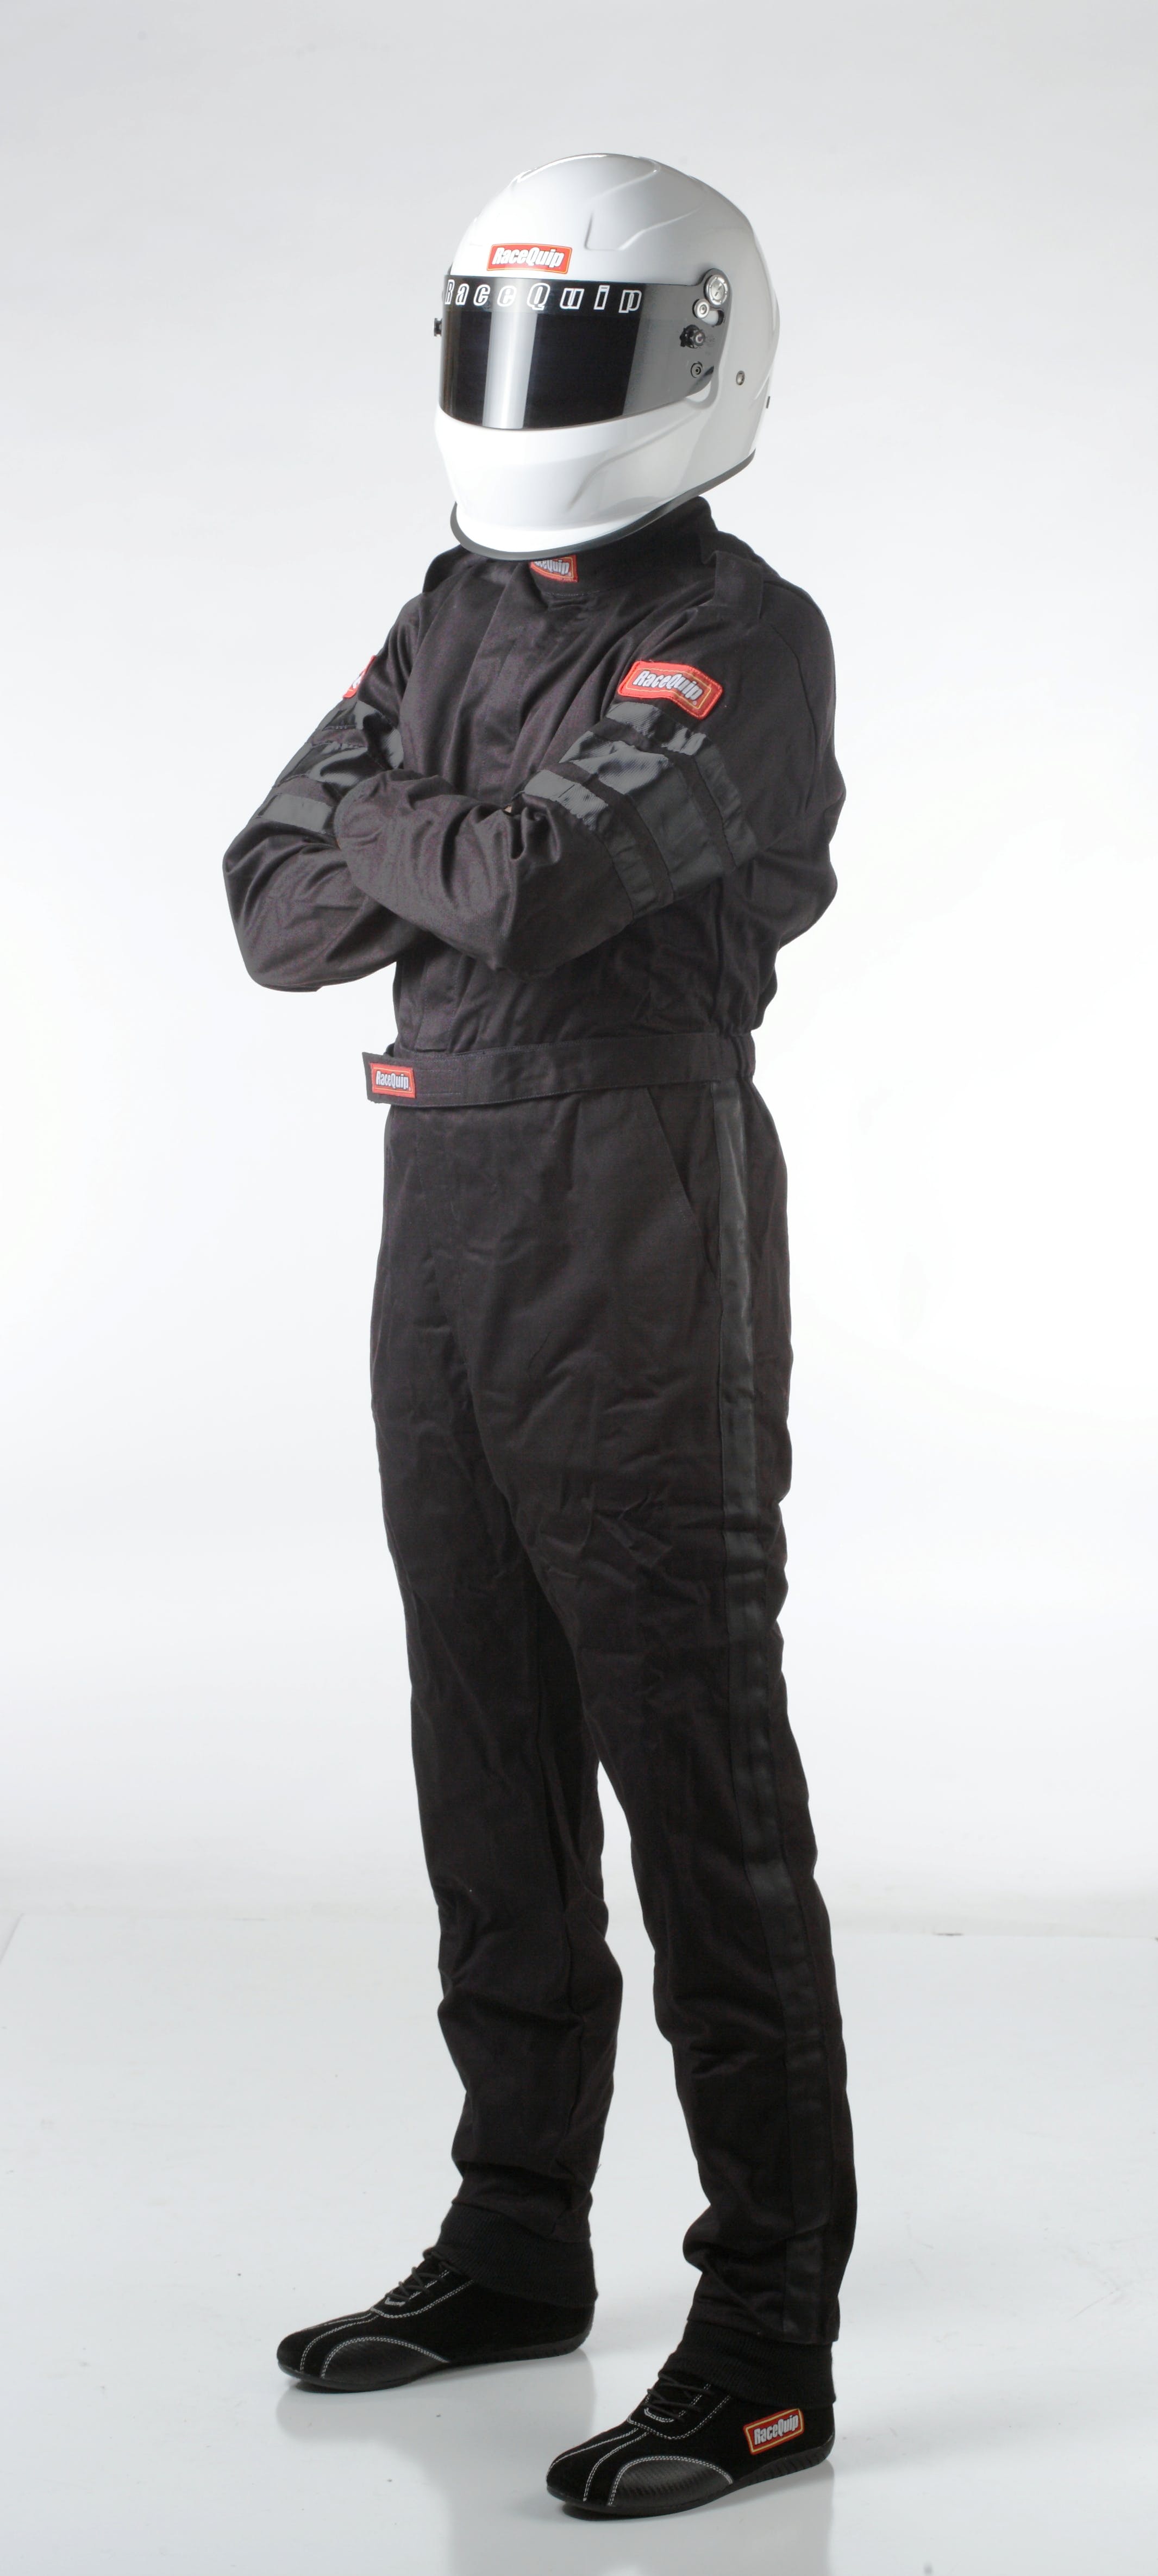 RaceQuip 110006 SFI-1 Pyrovatex One-Piece Single-Layer Racing Fire Suit (Black, X-Large)